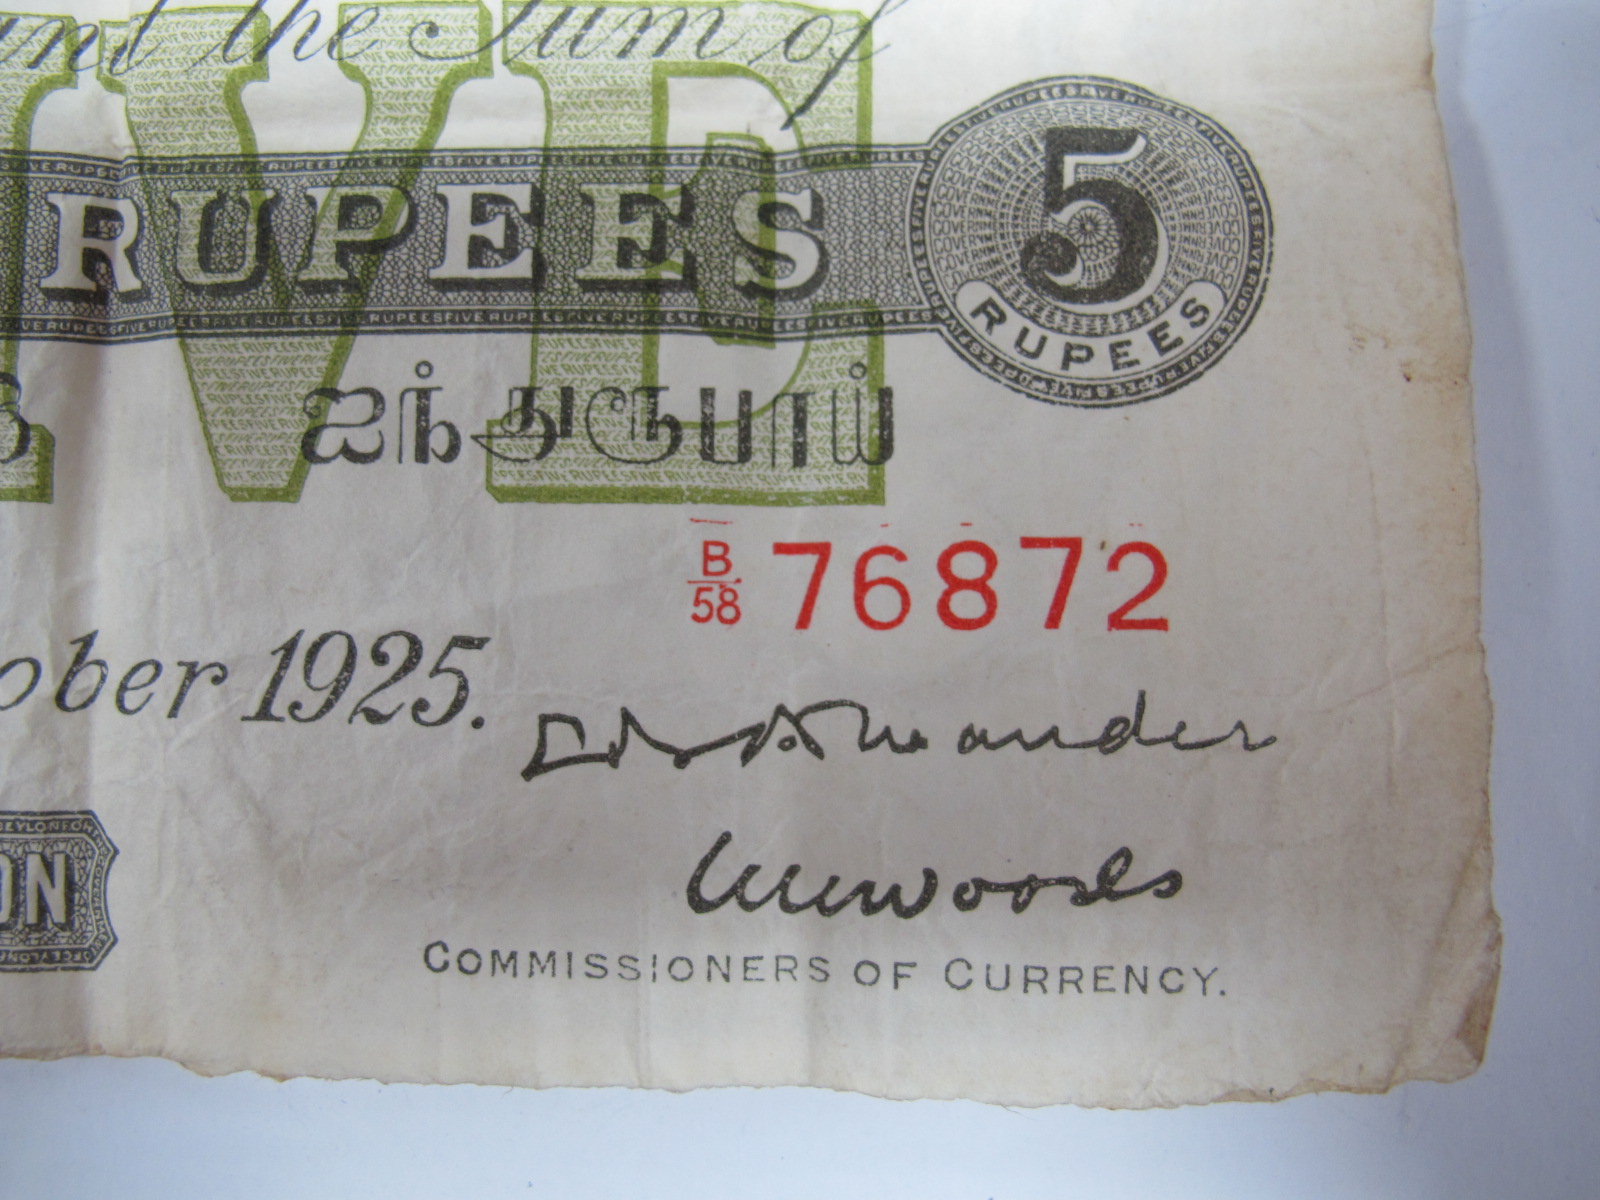 A Government of Ceylon Five Rupee Banknote, Colombo, 1st October 1925. Number B58 76872. Much folded - Image 6 of 7